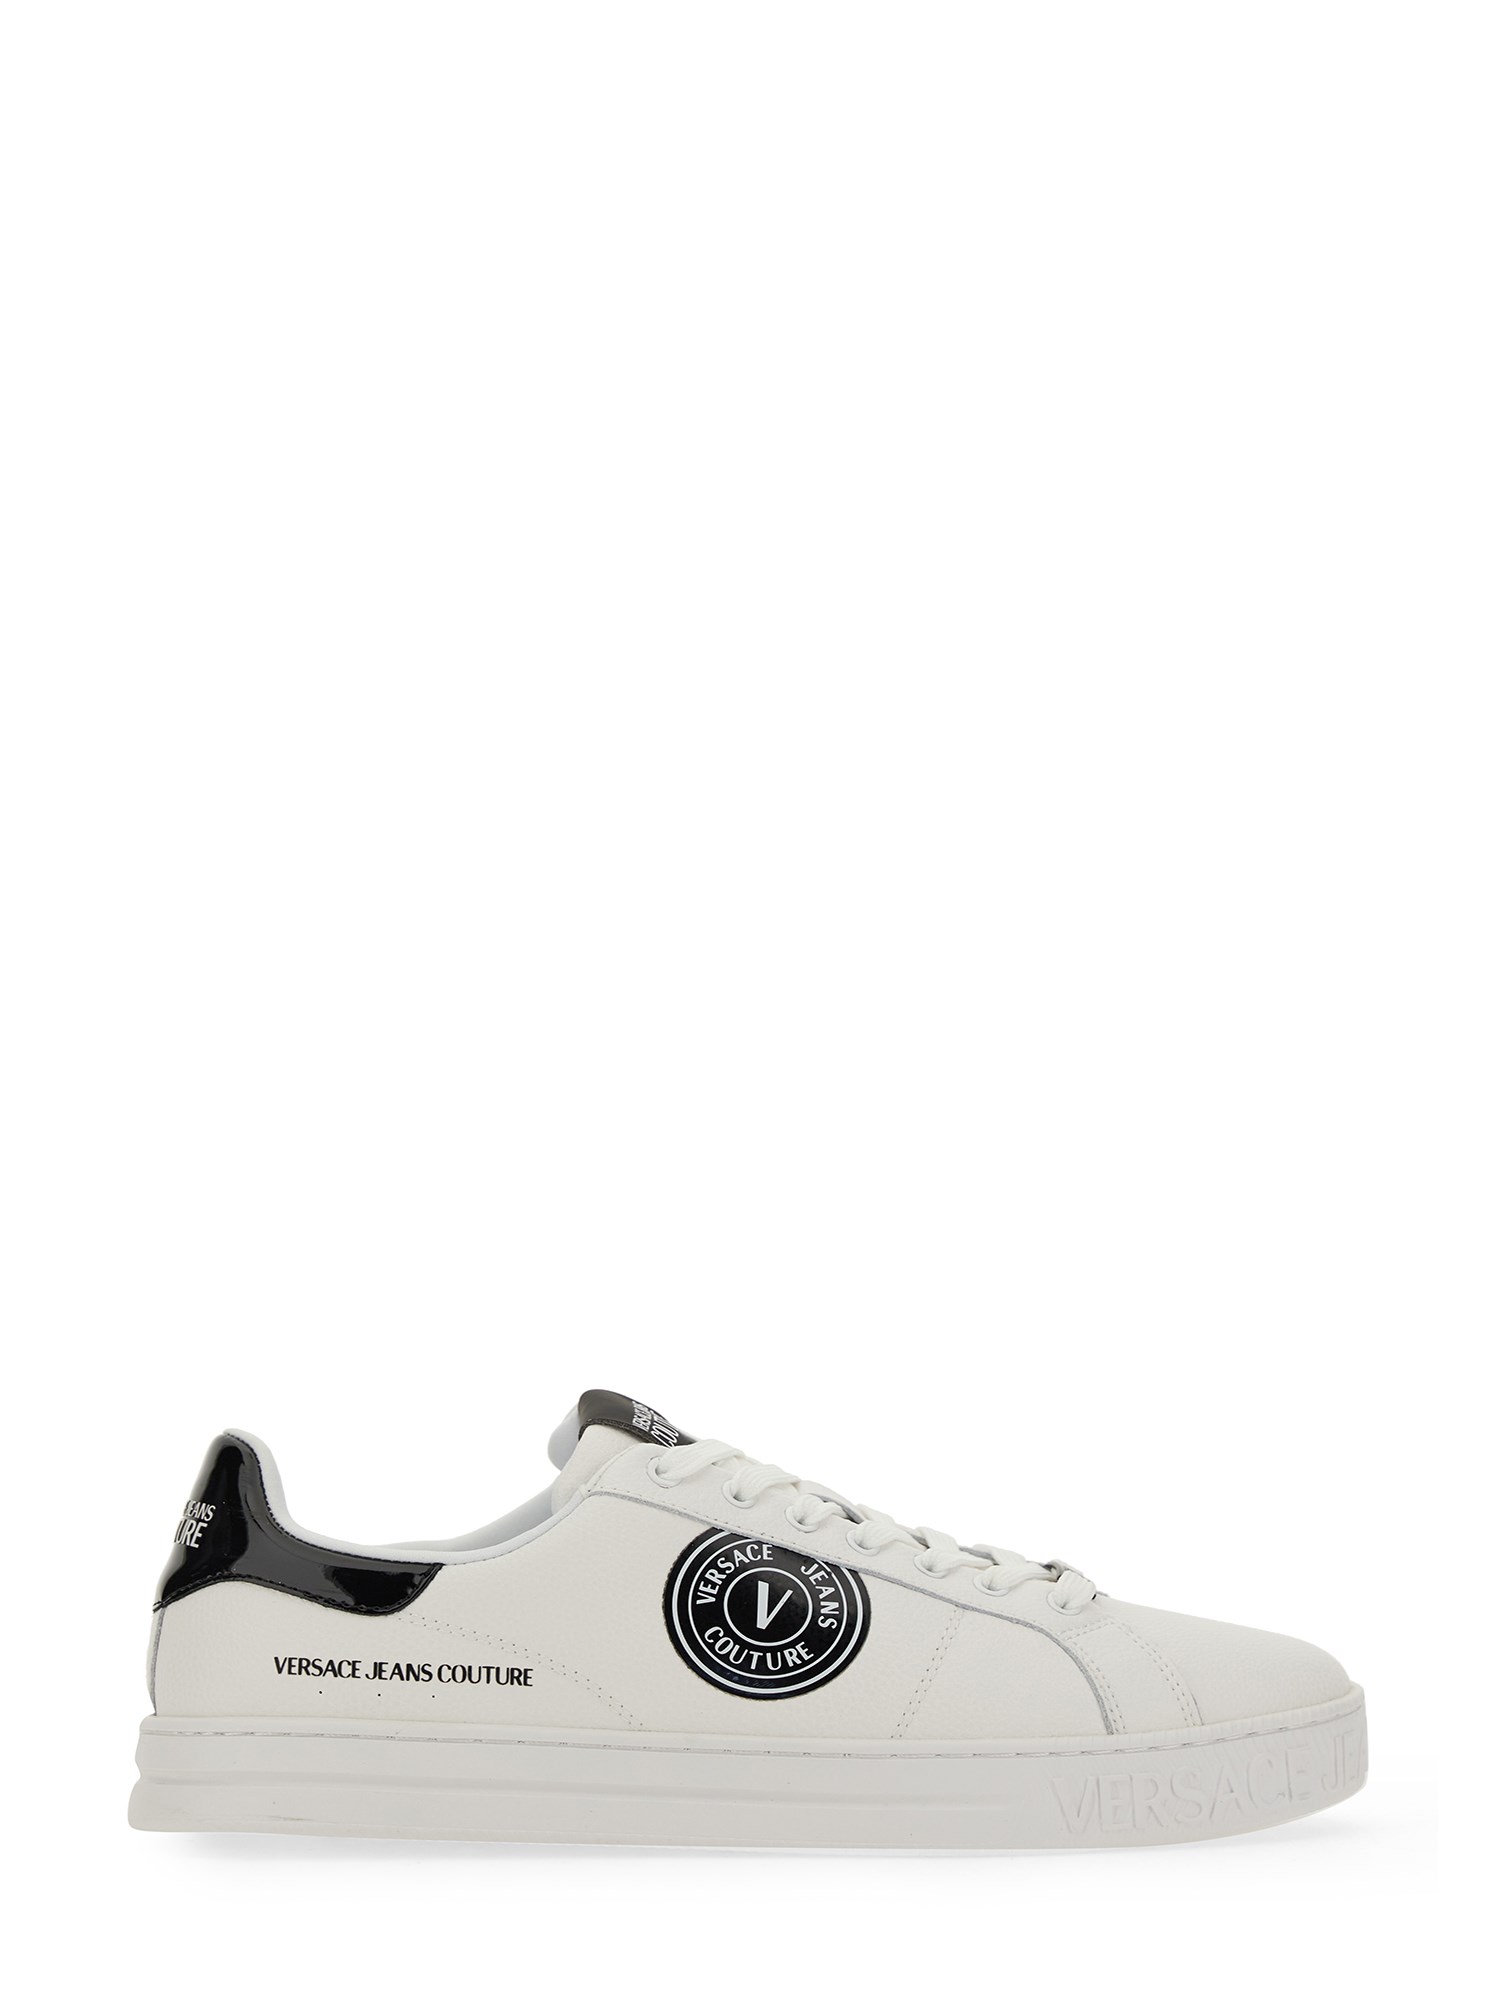 Versace Jeans Couture versace jeans couture sneaker with logo